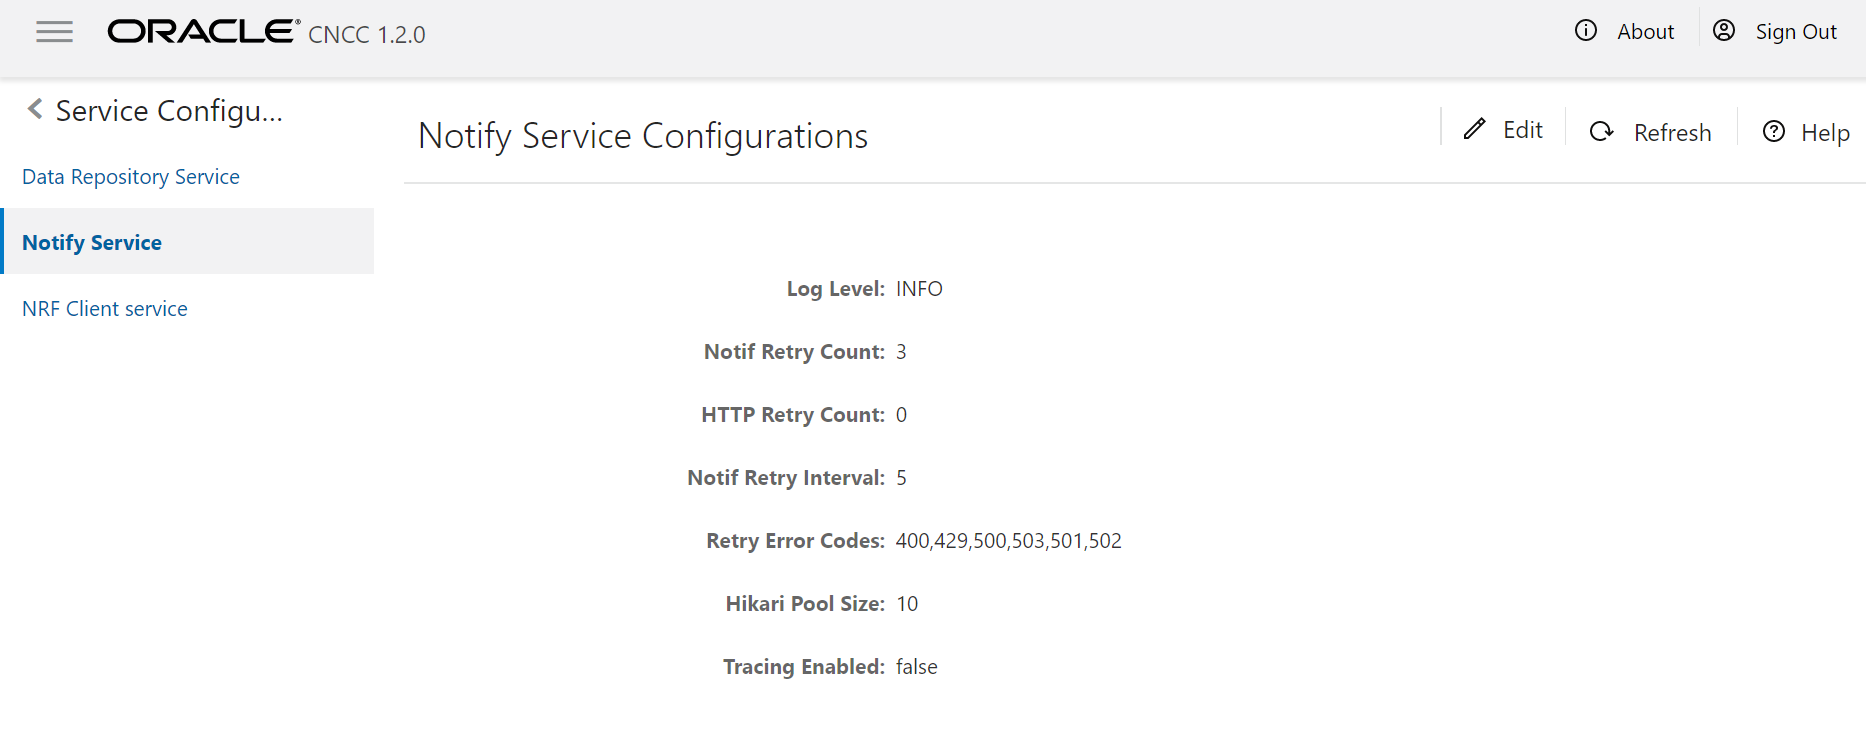 img/notify-service-configurations.png